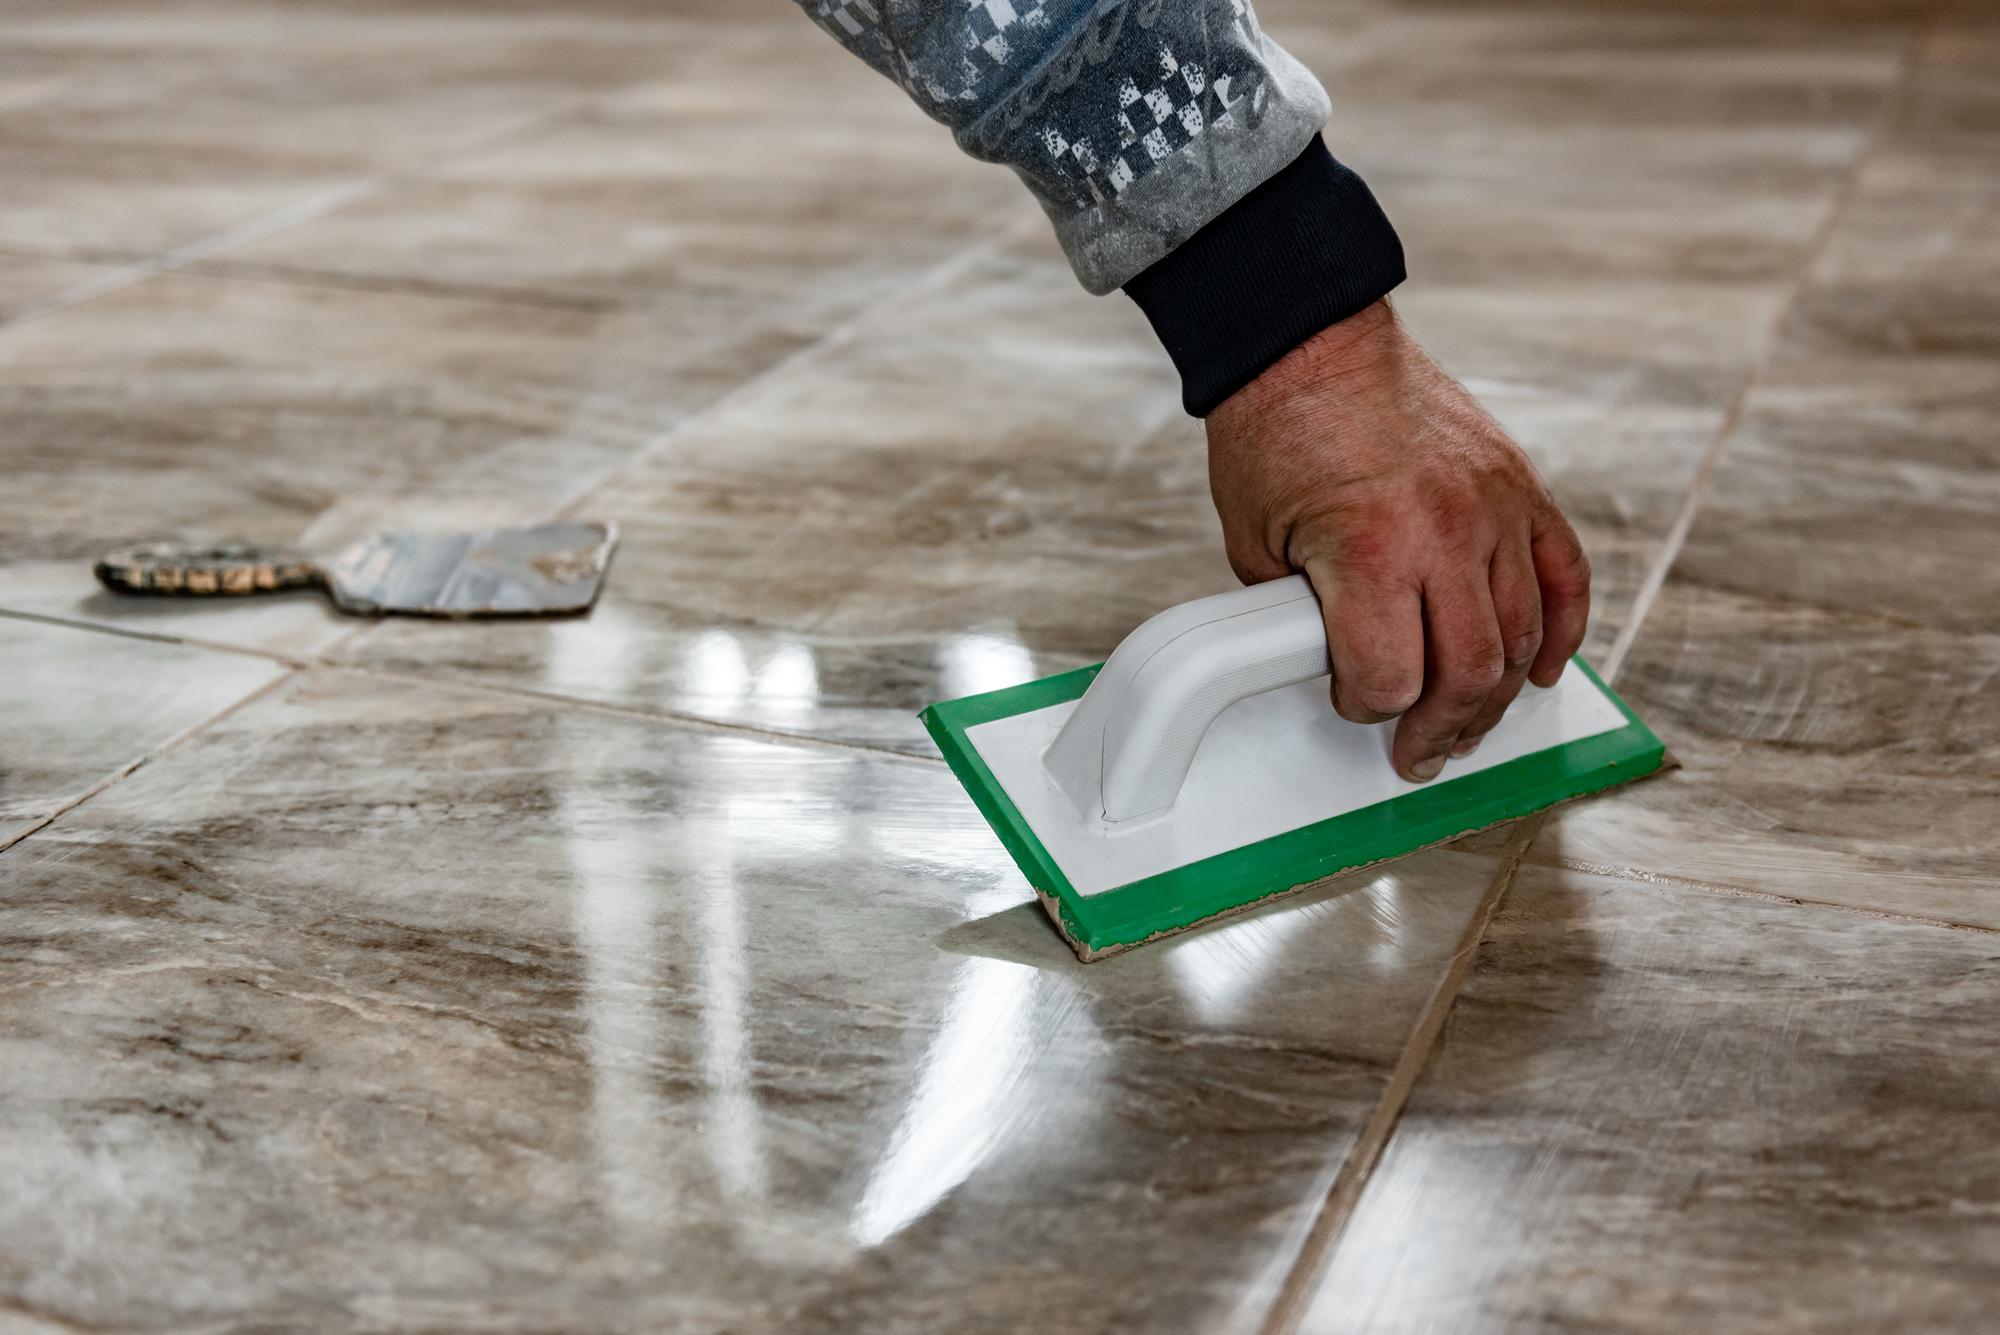 - How to care for silver travertine